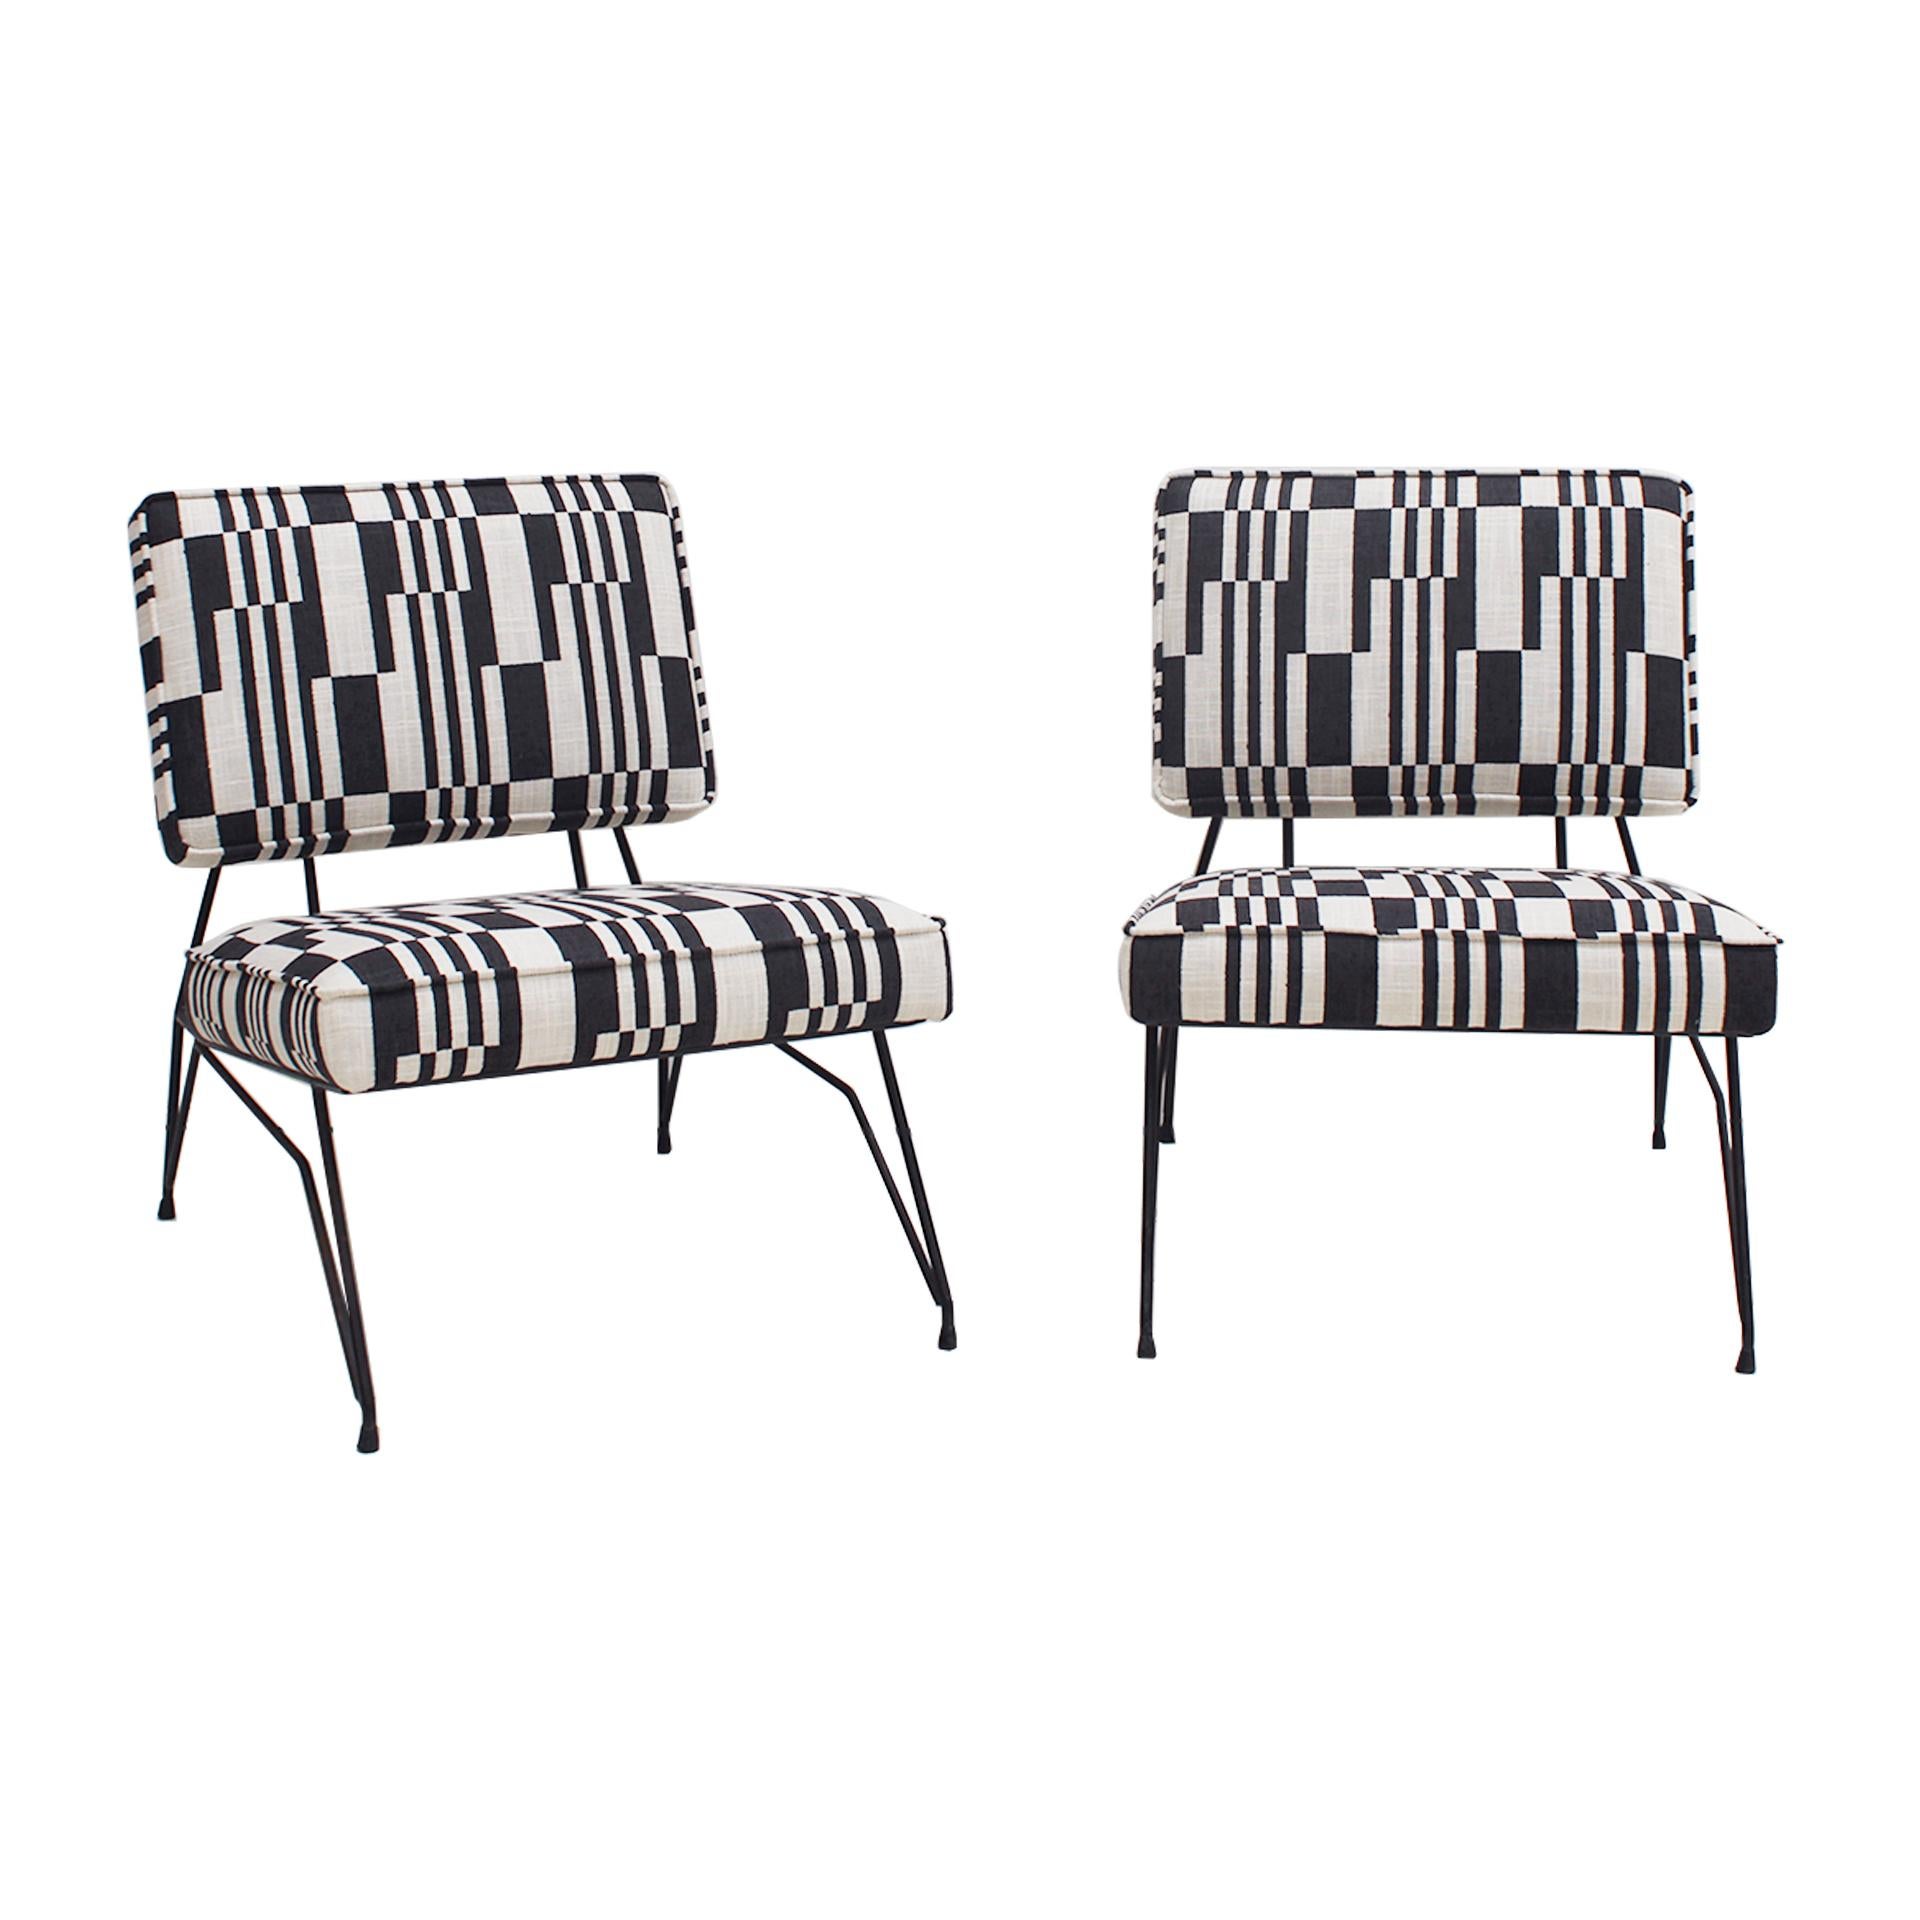 Pair of armchairs designed by Cerruti Di Lissone made with a tubular structure in black lacquered steel. Linen upholstered with a black and white rectangular design print. Italy 50s.